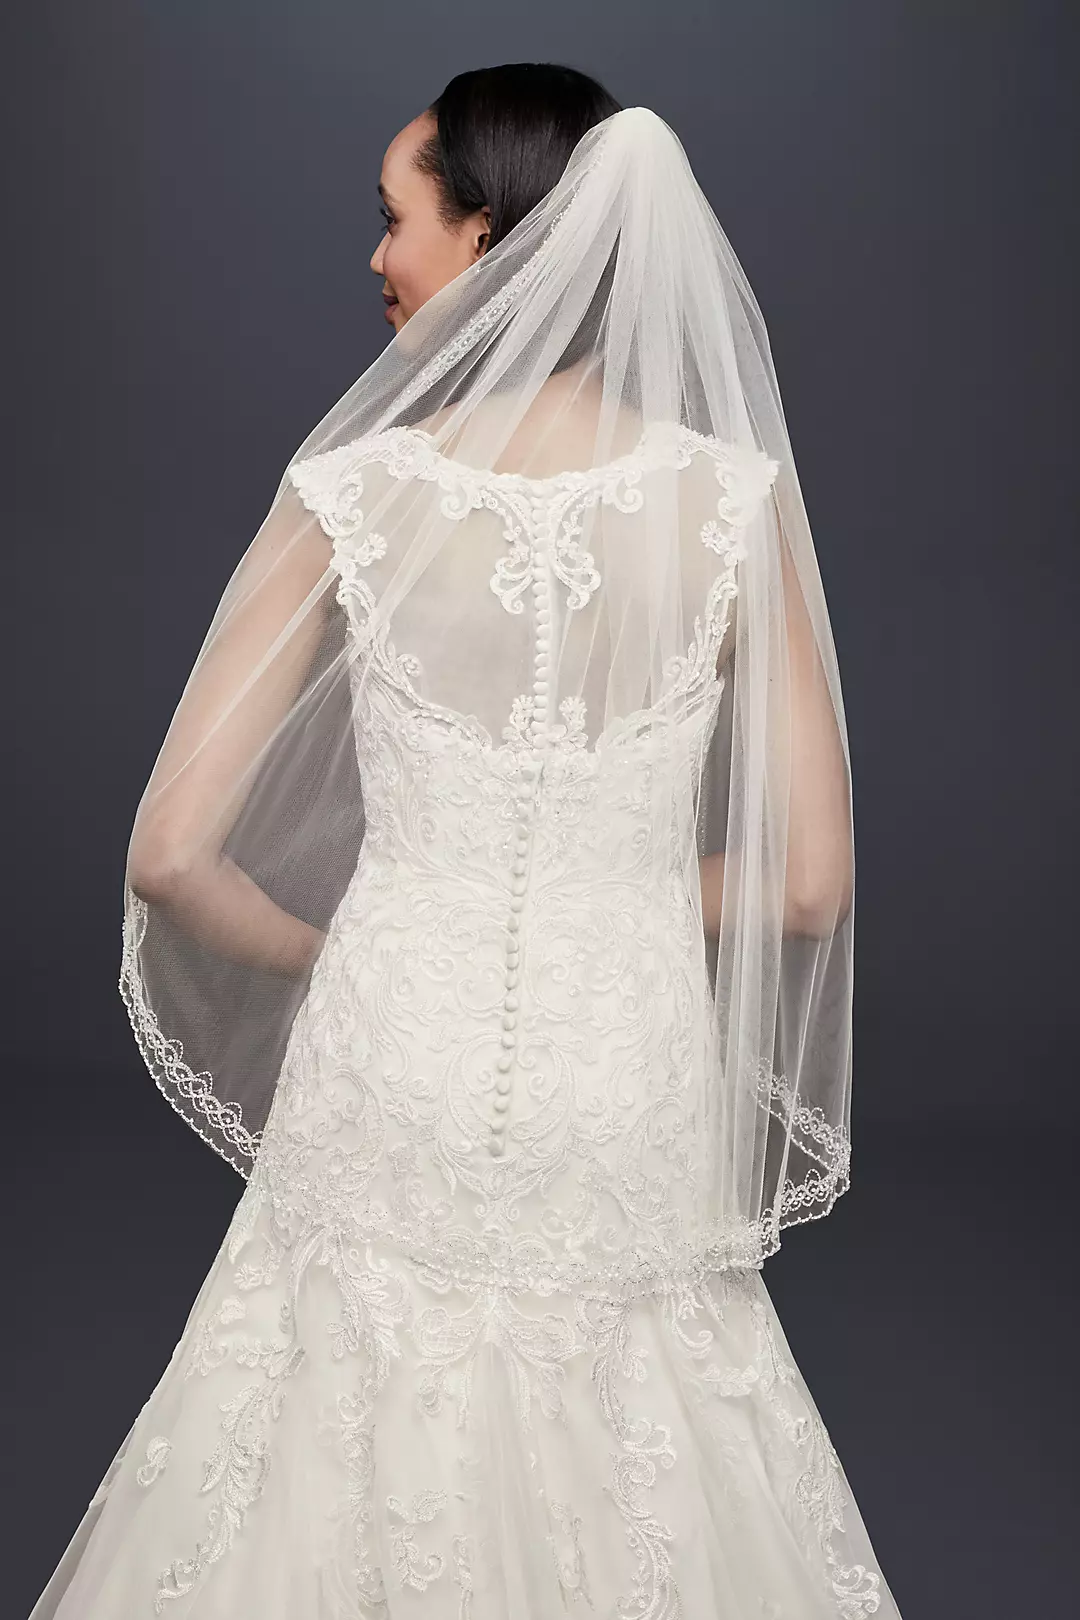 One Tier Mid Veil with Beaded Design Image